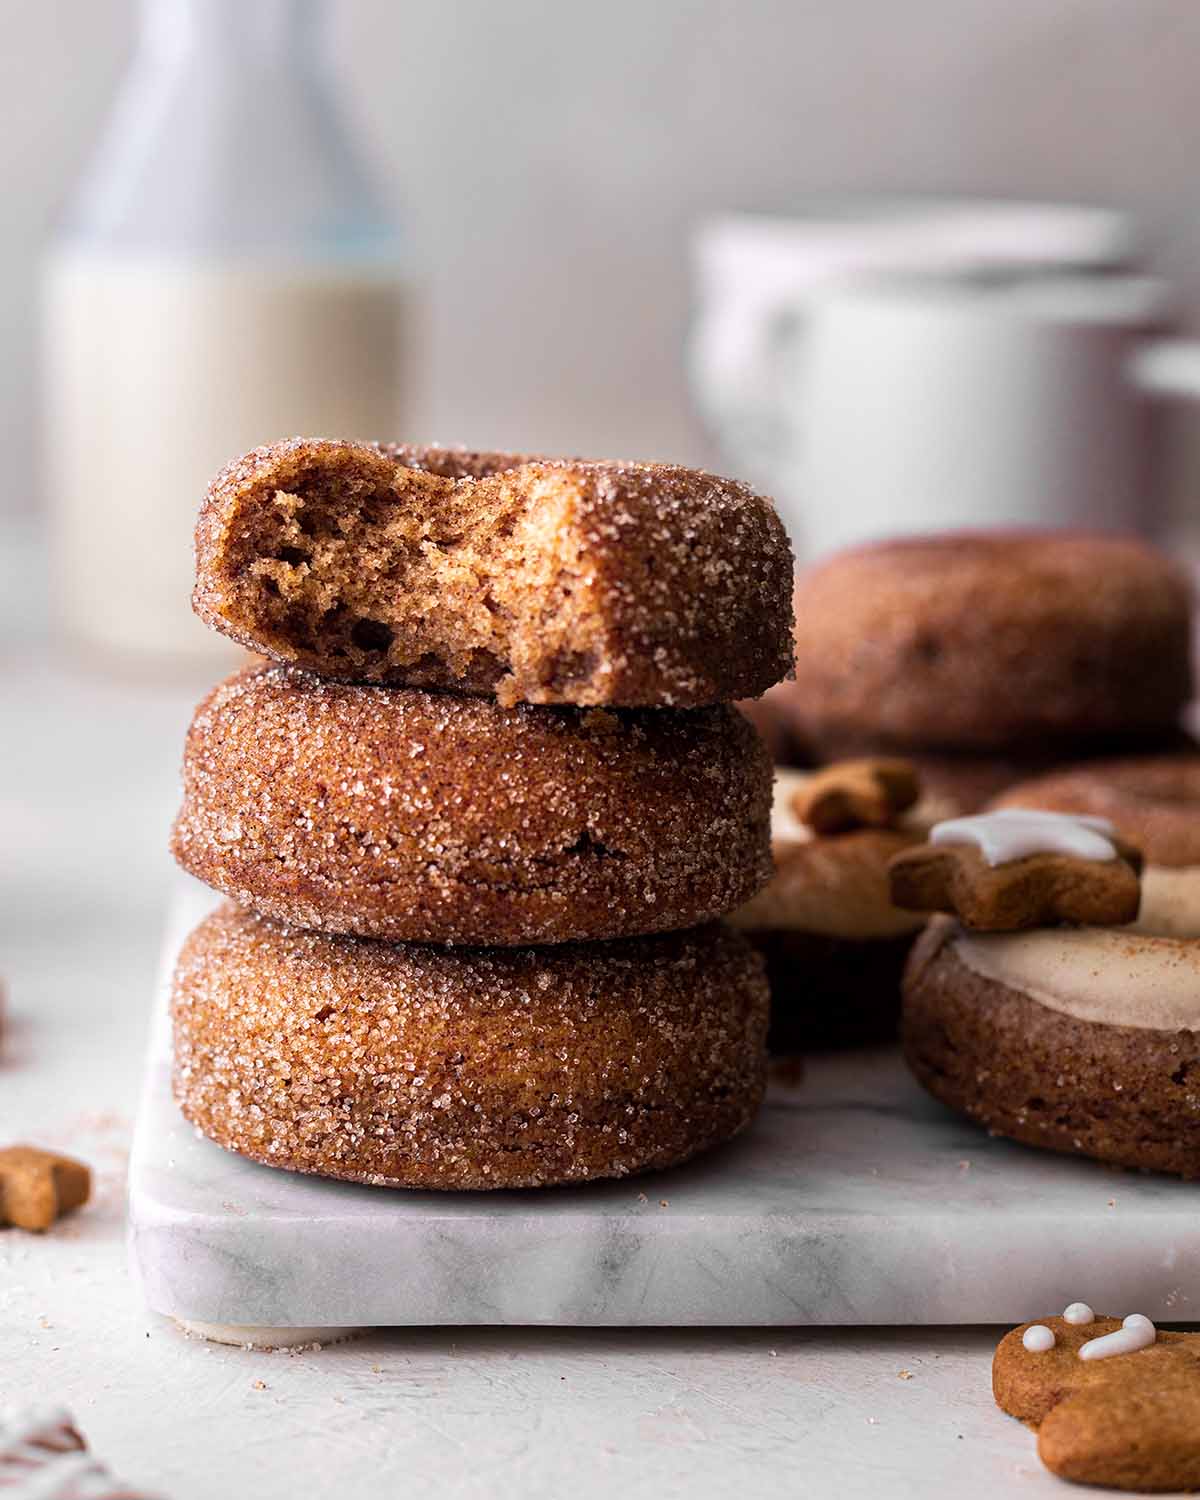 Stack of gingerbread donuts covered in cinnamon sugar. Top donut has a bite taken out showing fluffy texture.